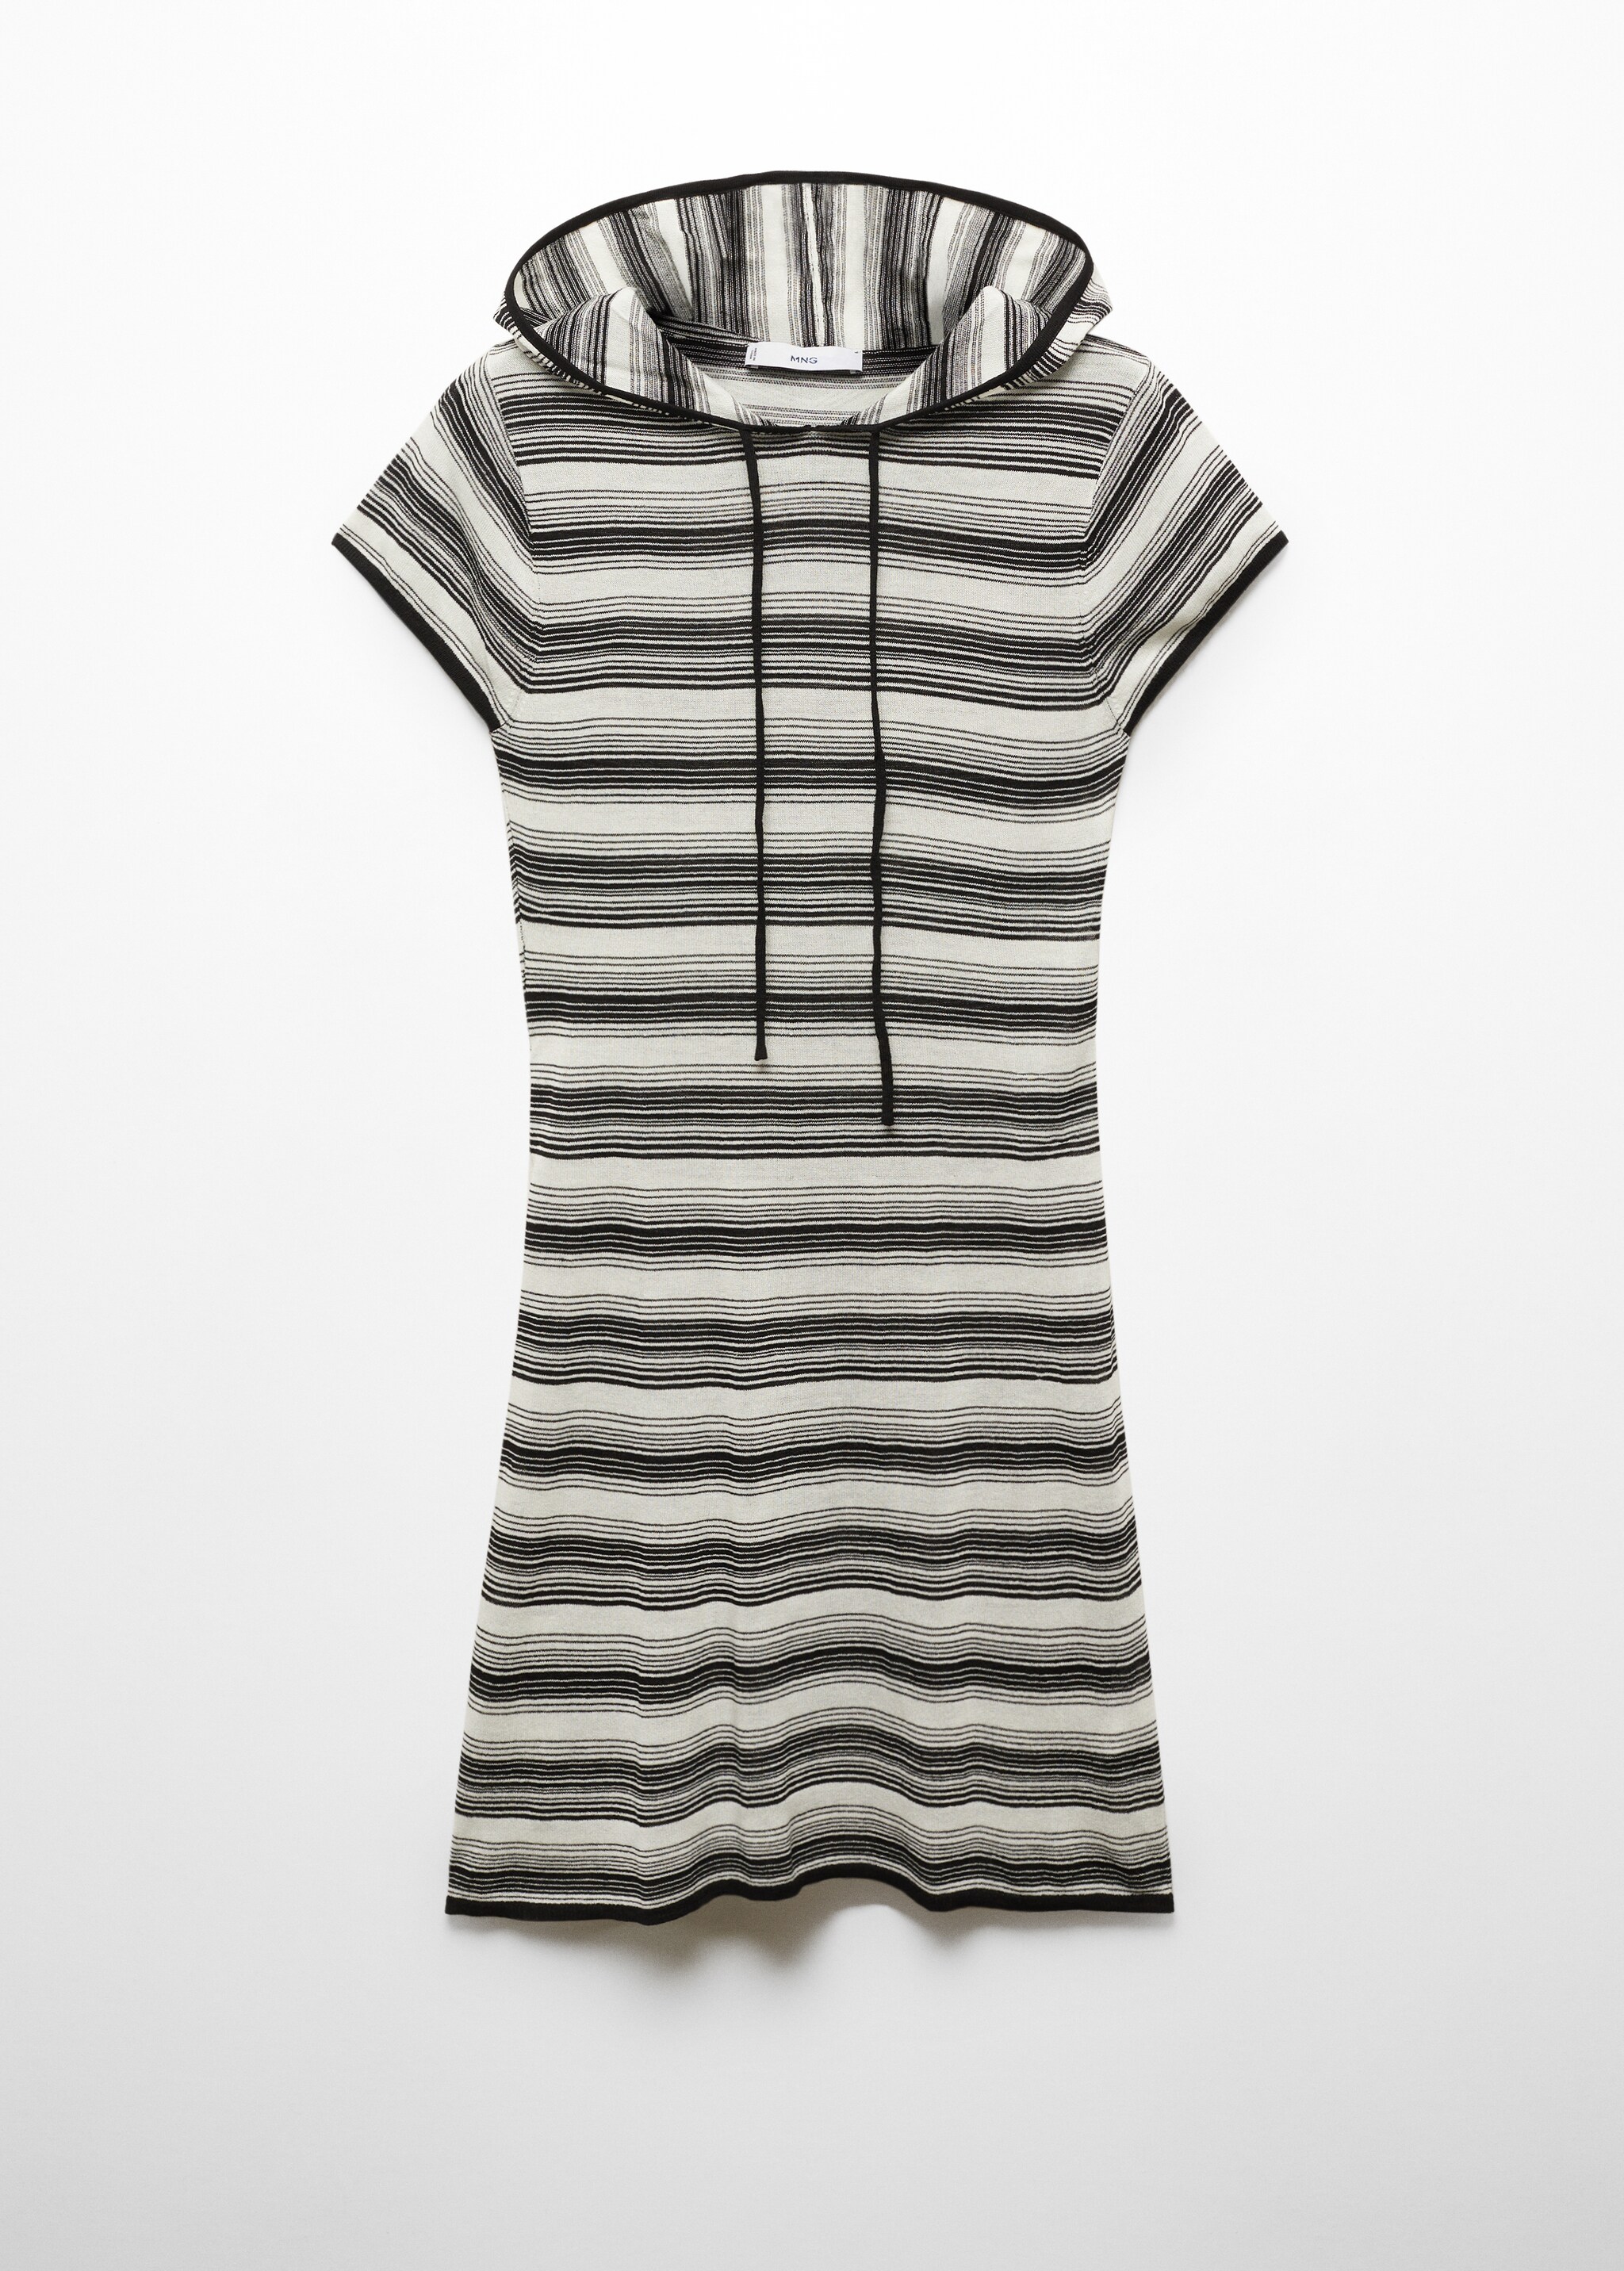 Hooded striped dress - Article without model